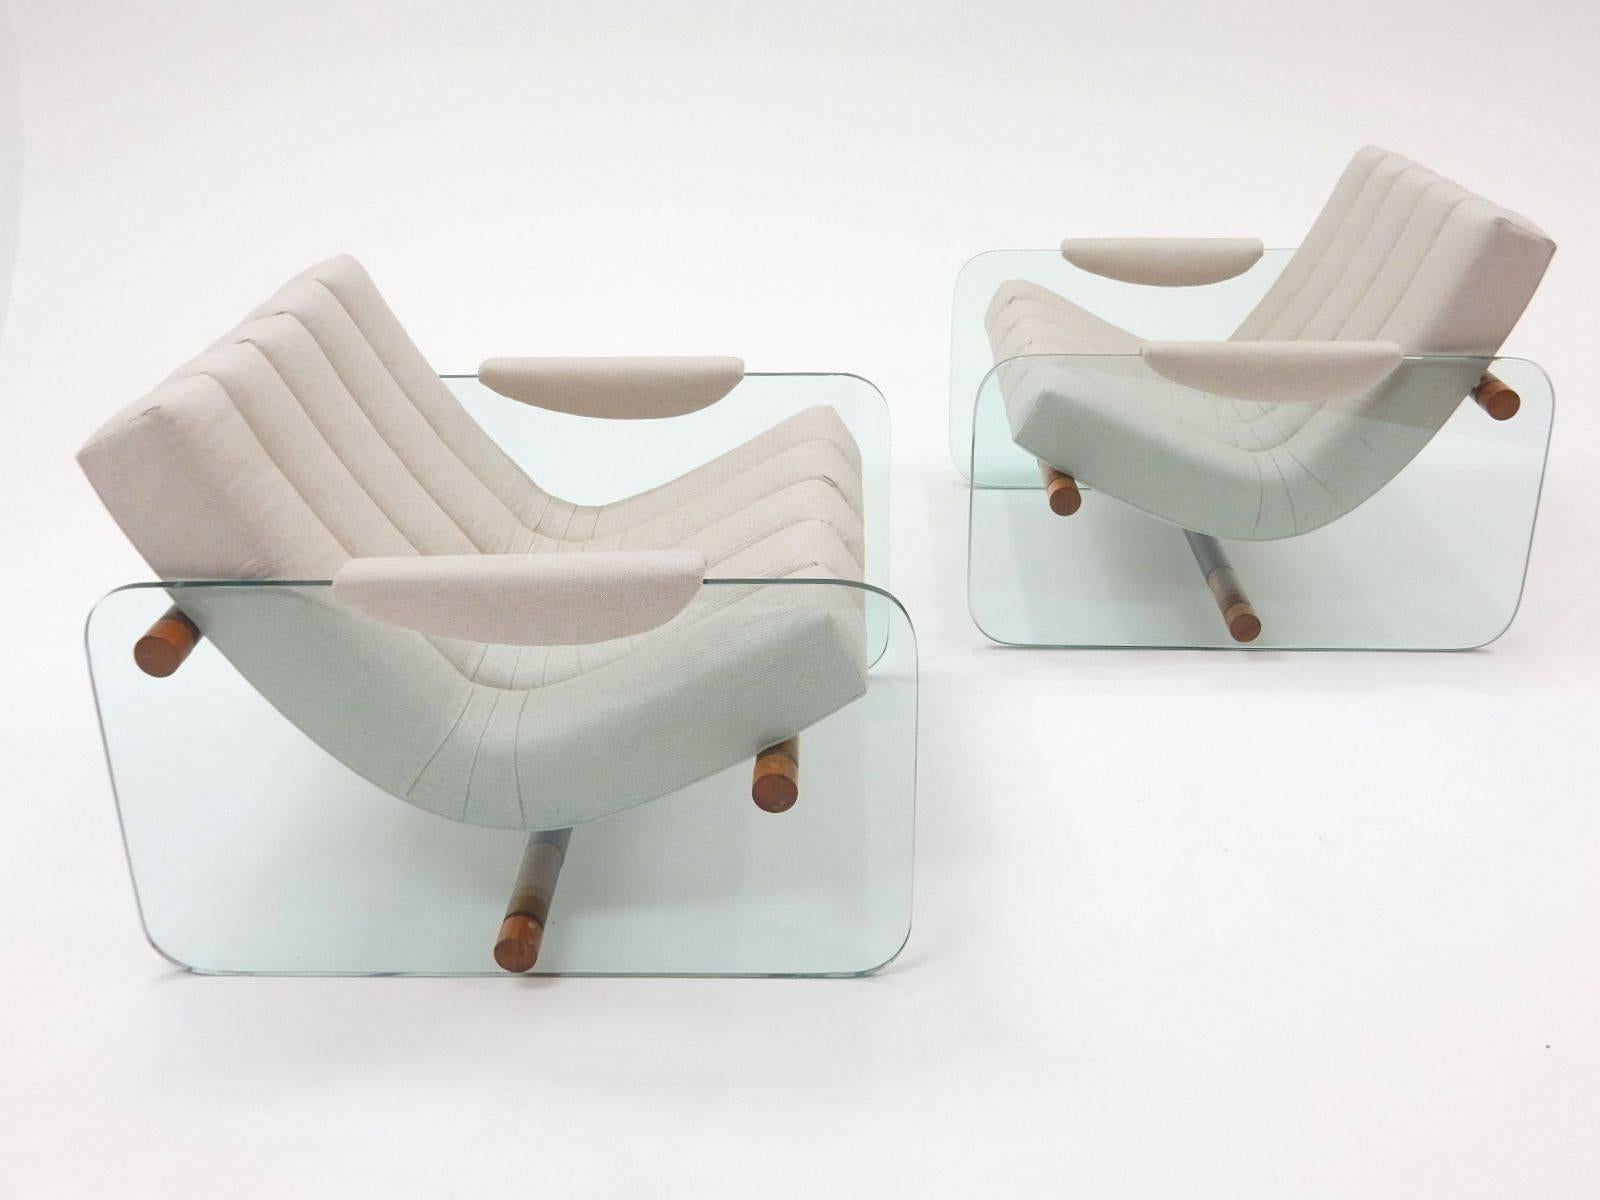 A pair of glass, wood and upholstered lounge chairs in the style of Italian designer Fabio Lenci (1935-).
3/4